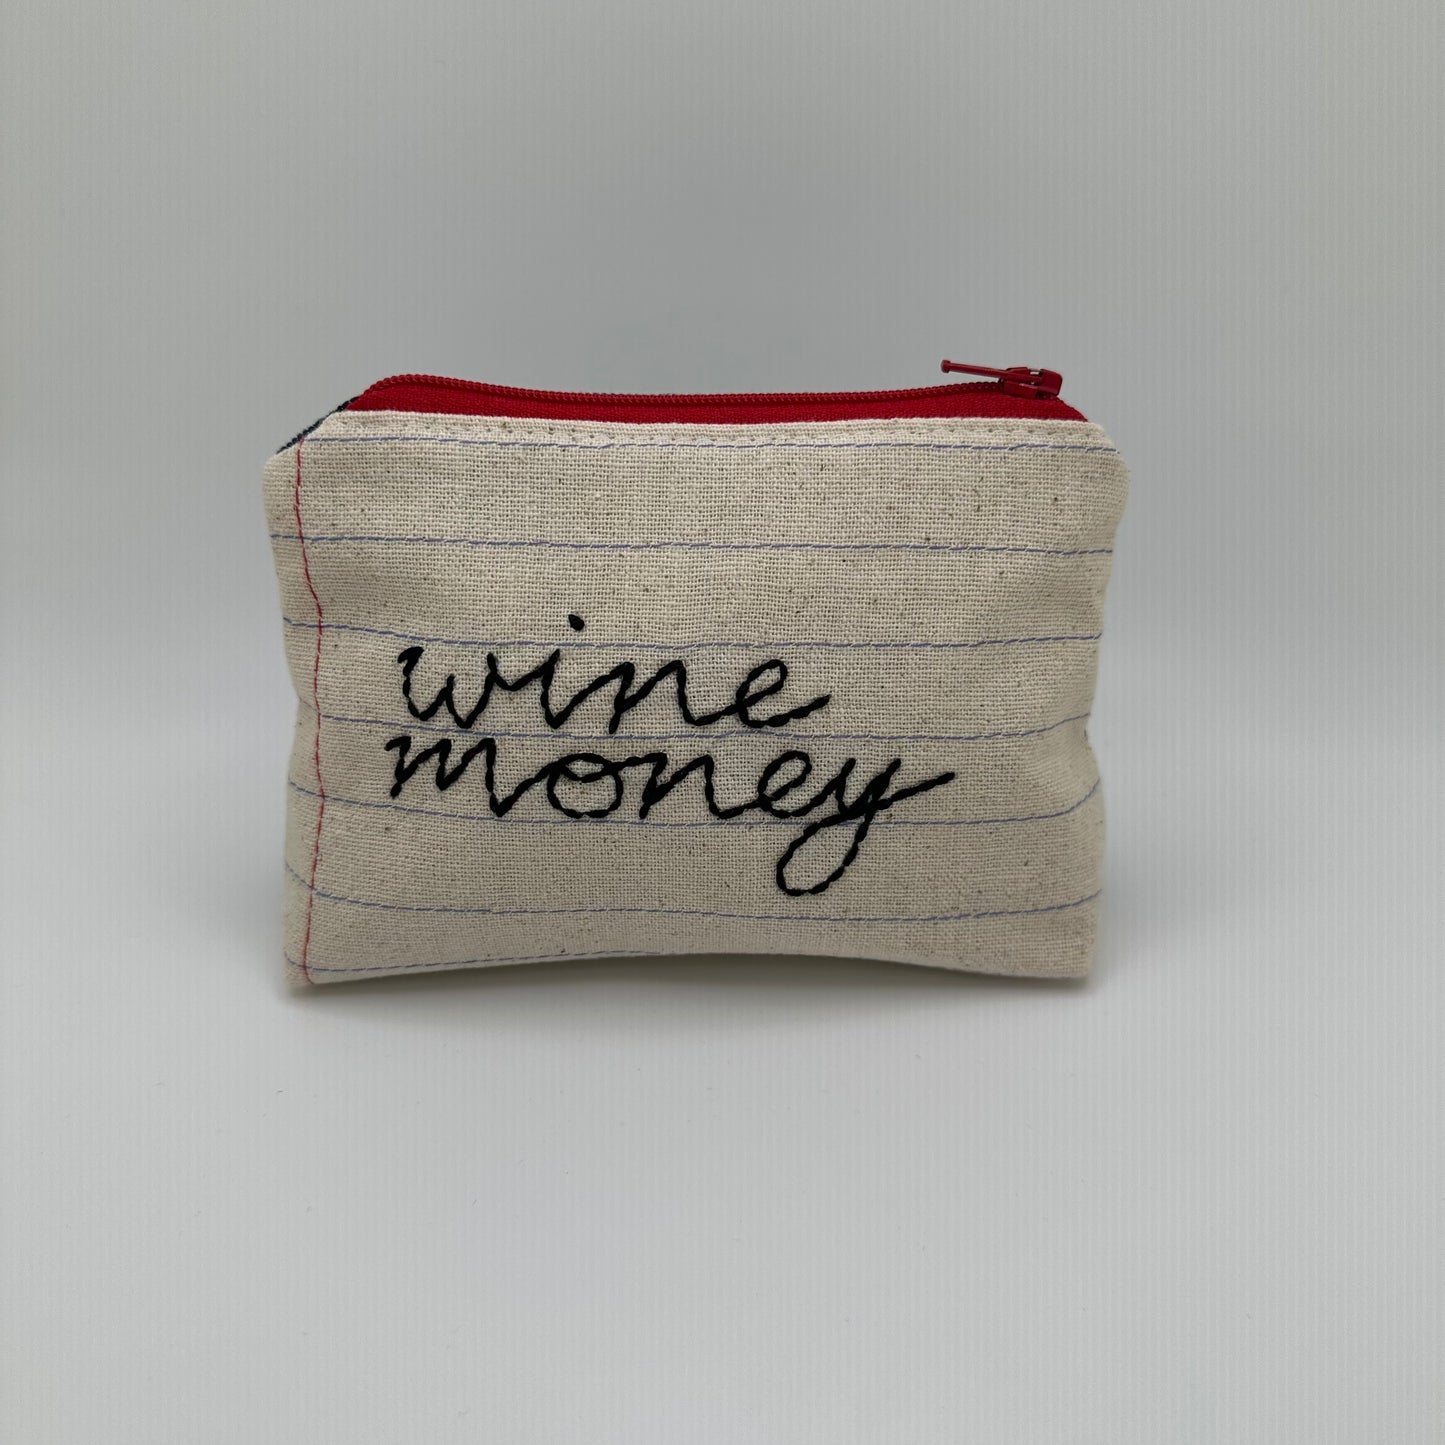 Handmade pouch sewn with the words "wine money"